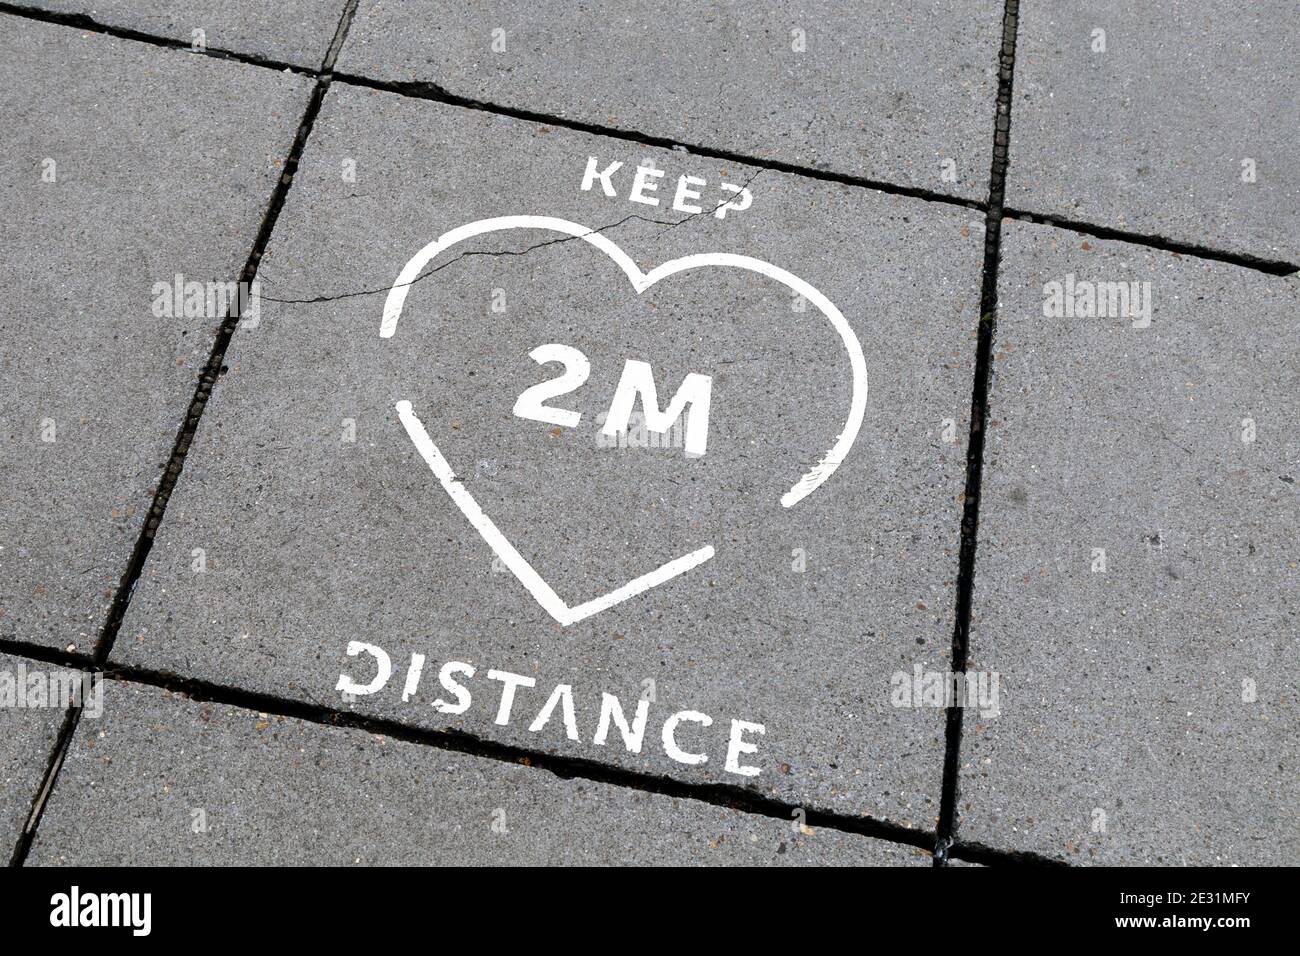 9 January 2021 London, UK - Sign on the ground in Charing Cross to remind people to keep 2m distance when entering the Underground during Coronavirus Stock Photo